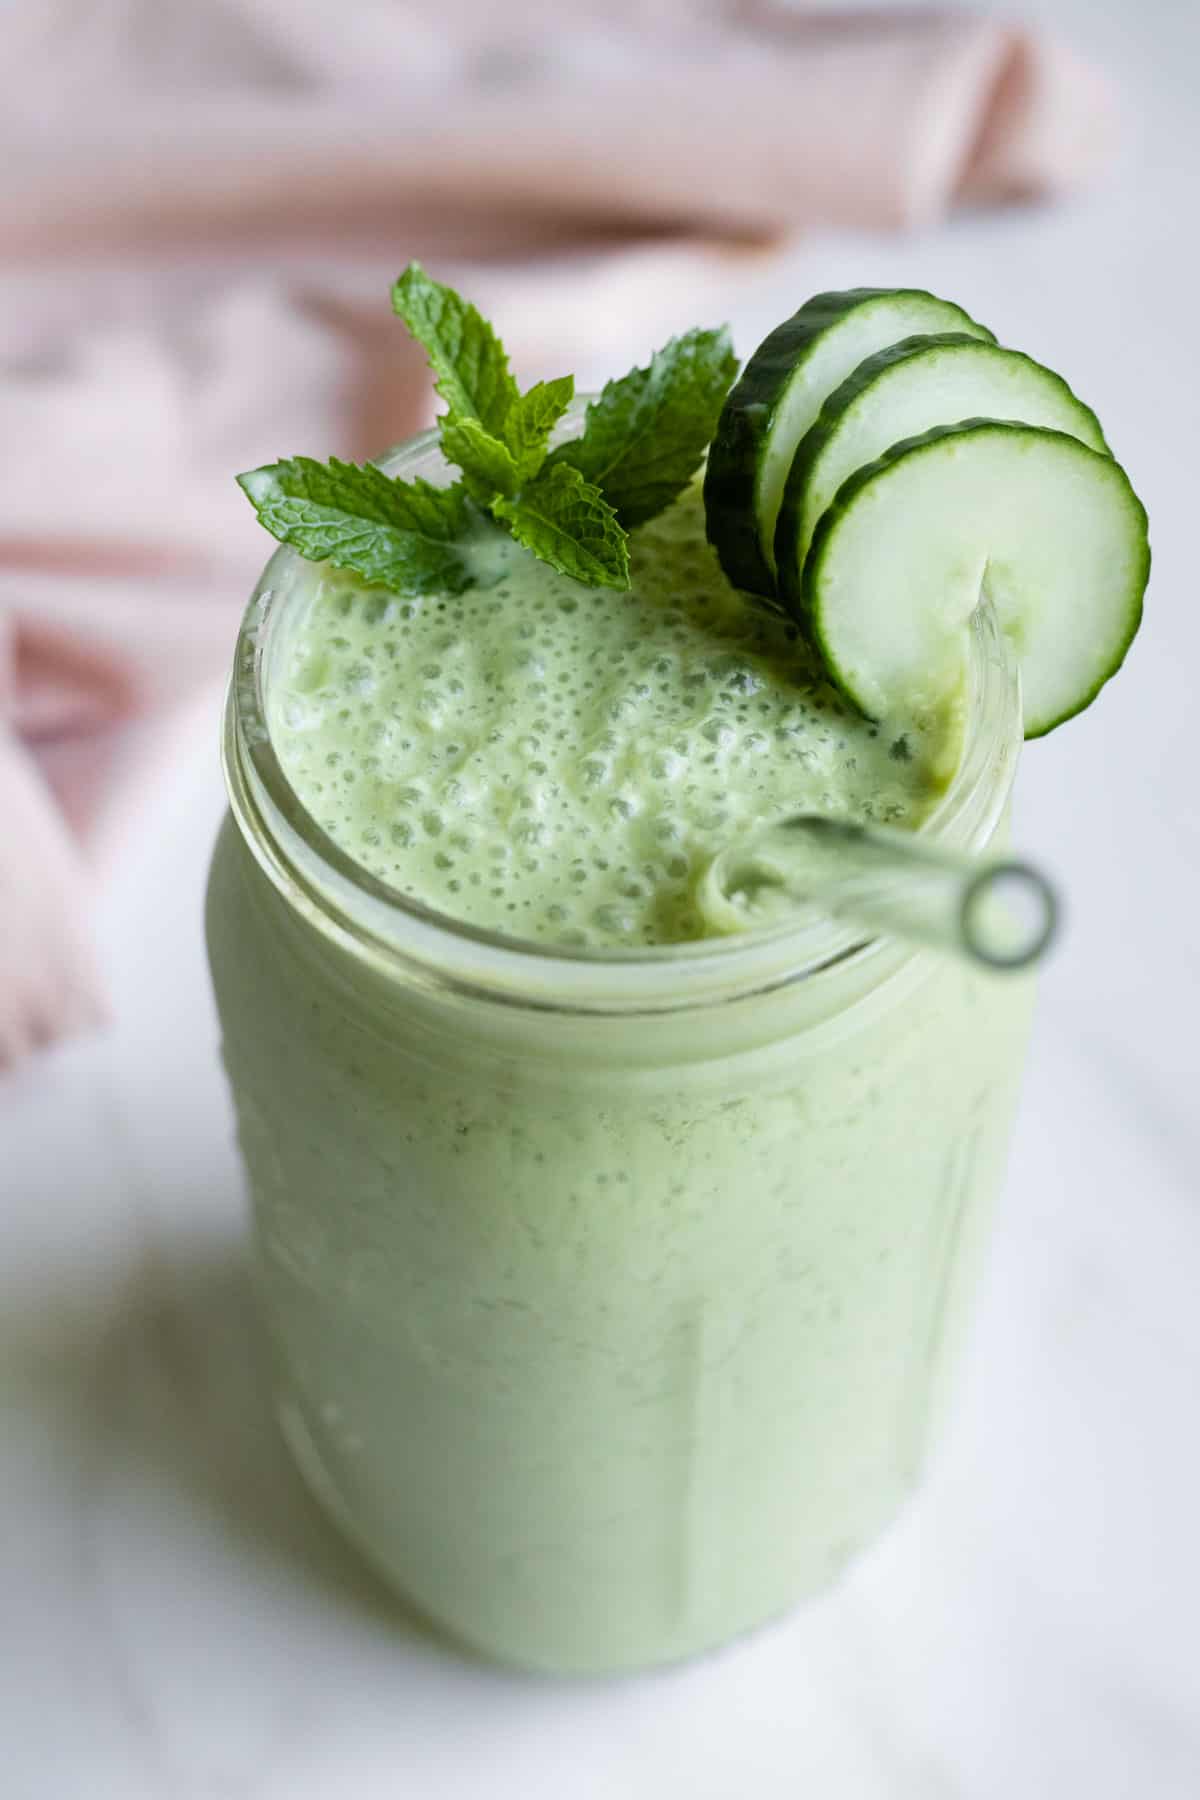 Looking down at a Ball jar filled with creamy spinach cucumber smoothie garnished with mint and a slice of cucumber.